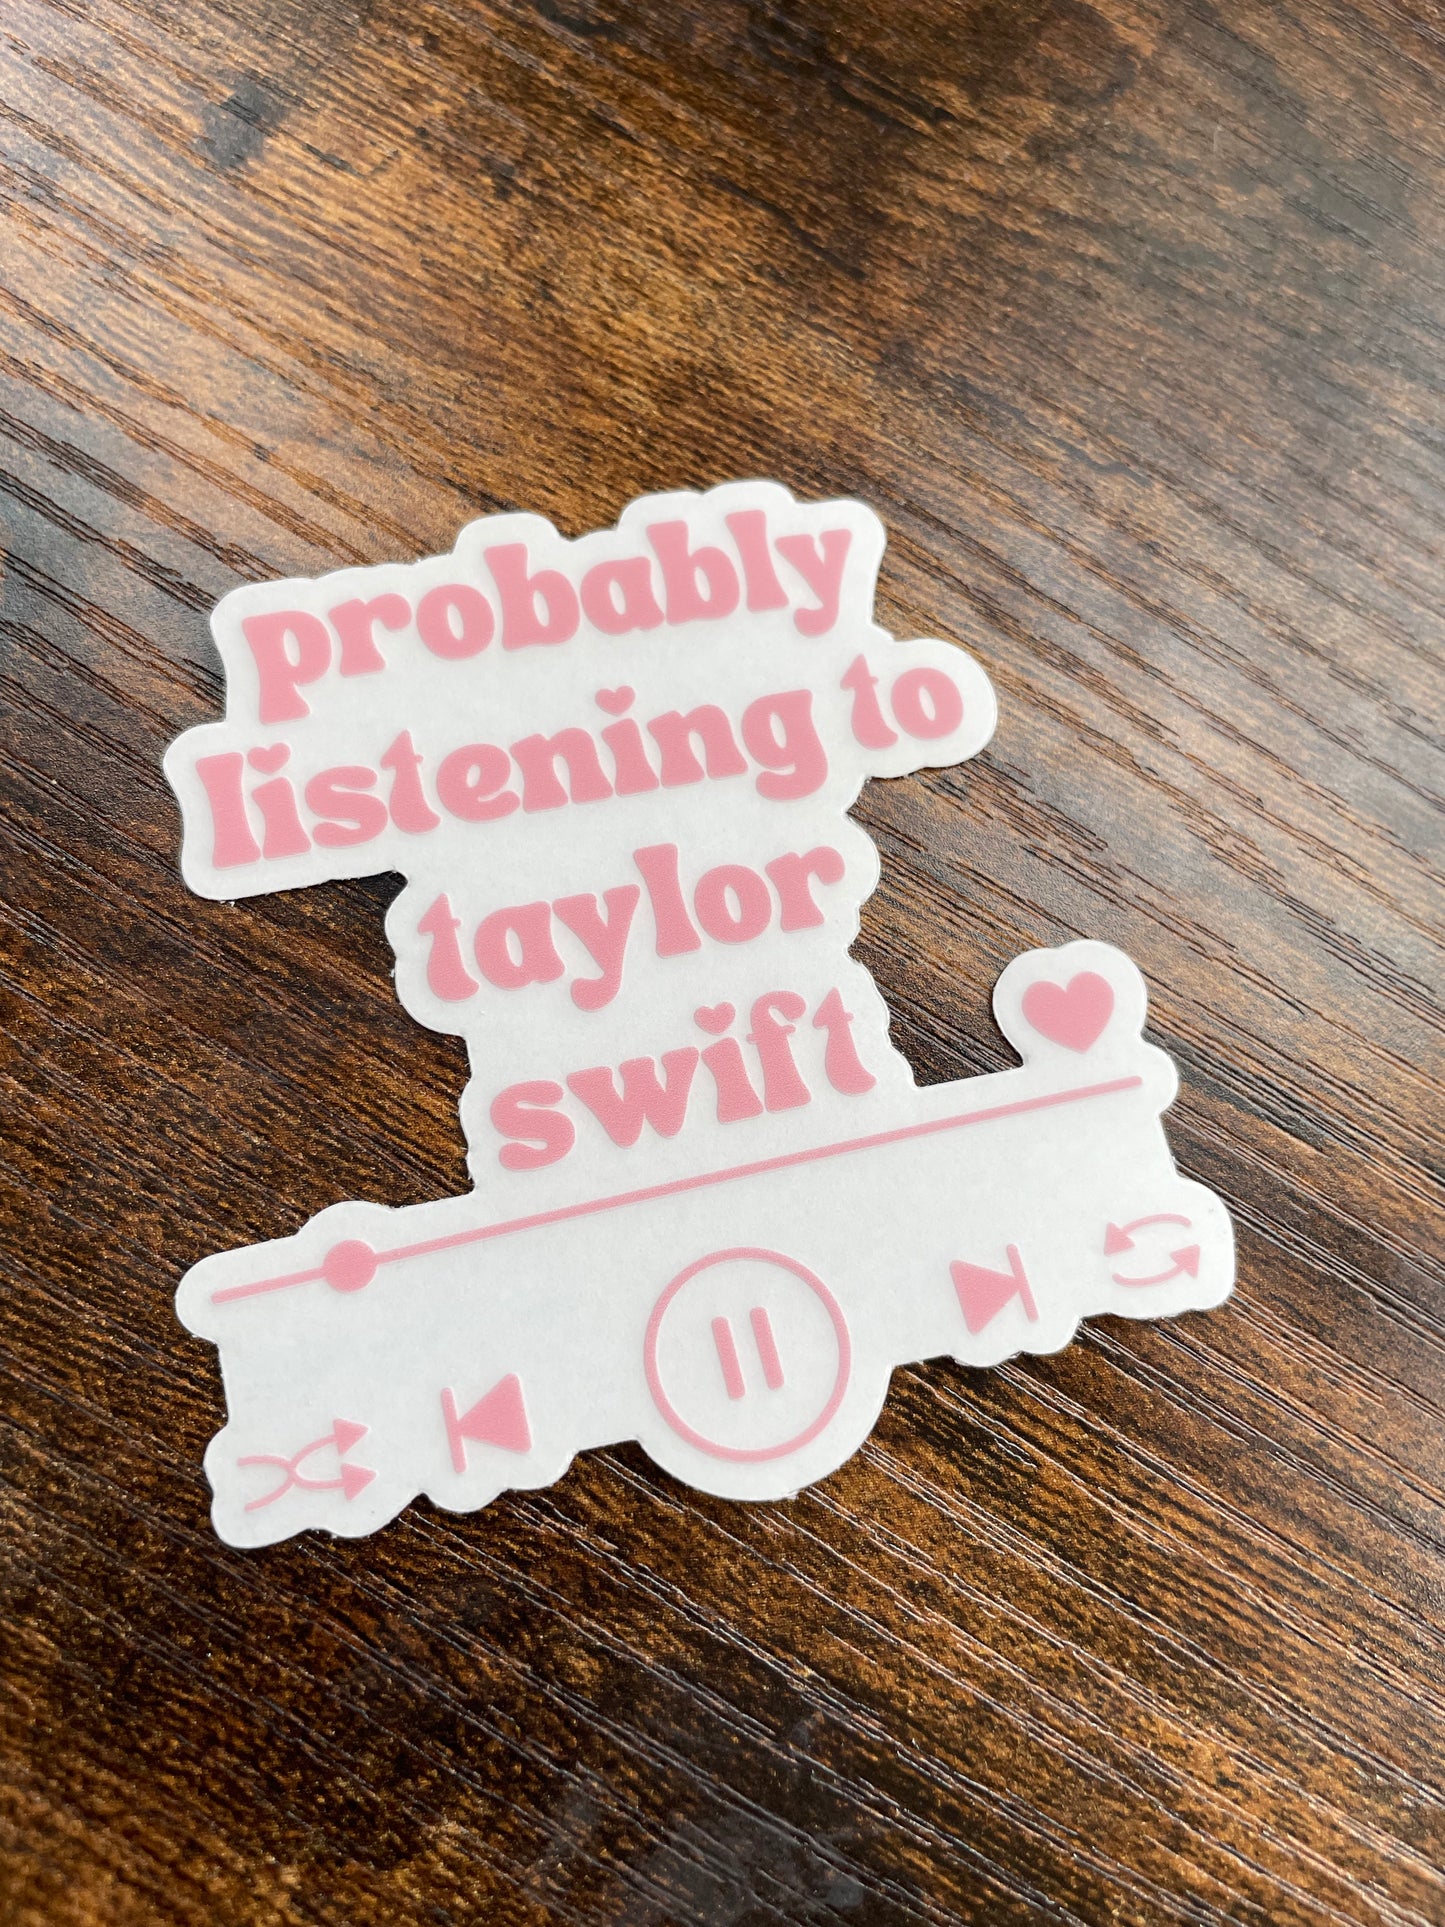 Probably Listening to Taylor Swift Sticker — Bless Your Heart